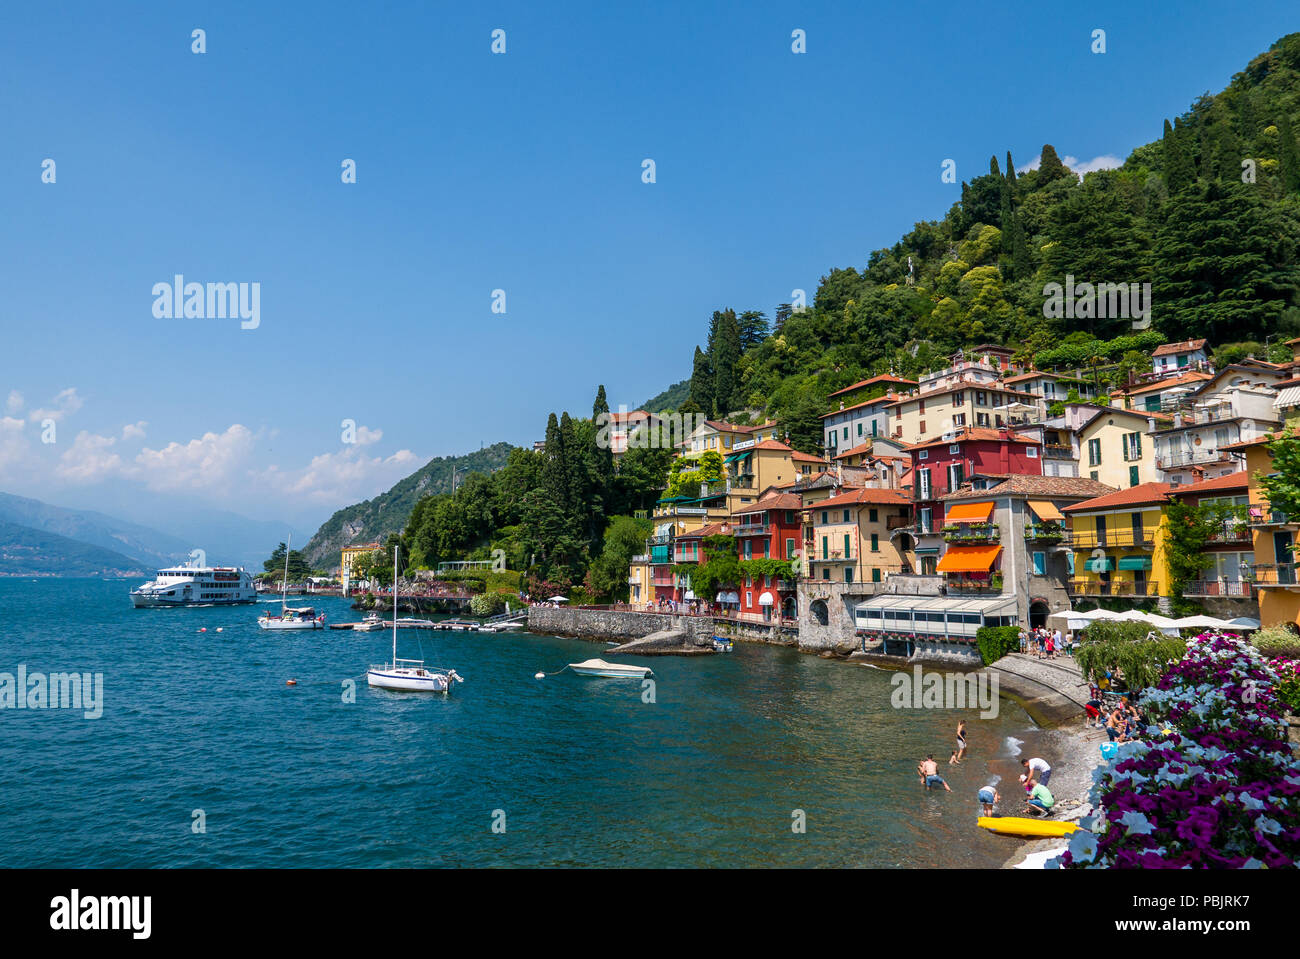 View of Varenna town one of the small beautiful towns on Como lake, Lombardy, Italy Stock Photo